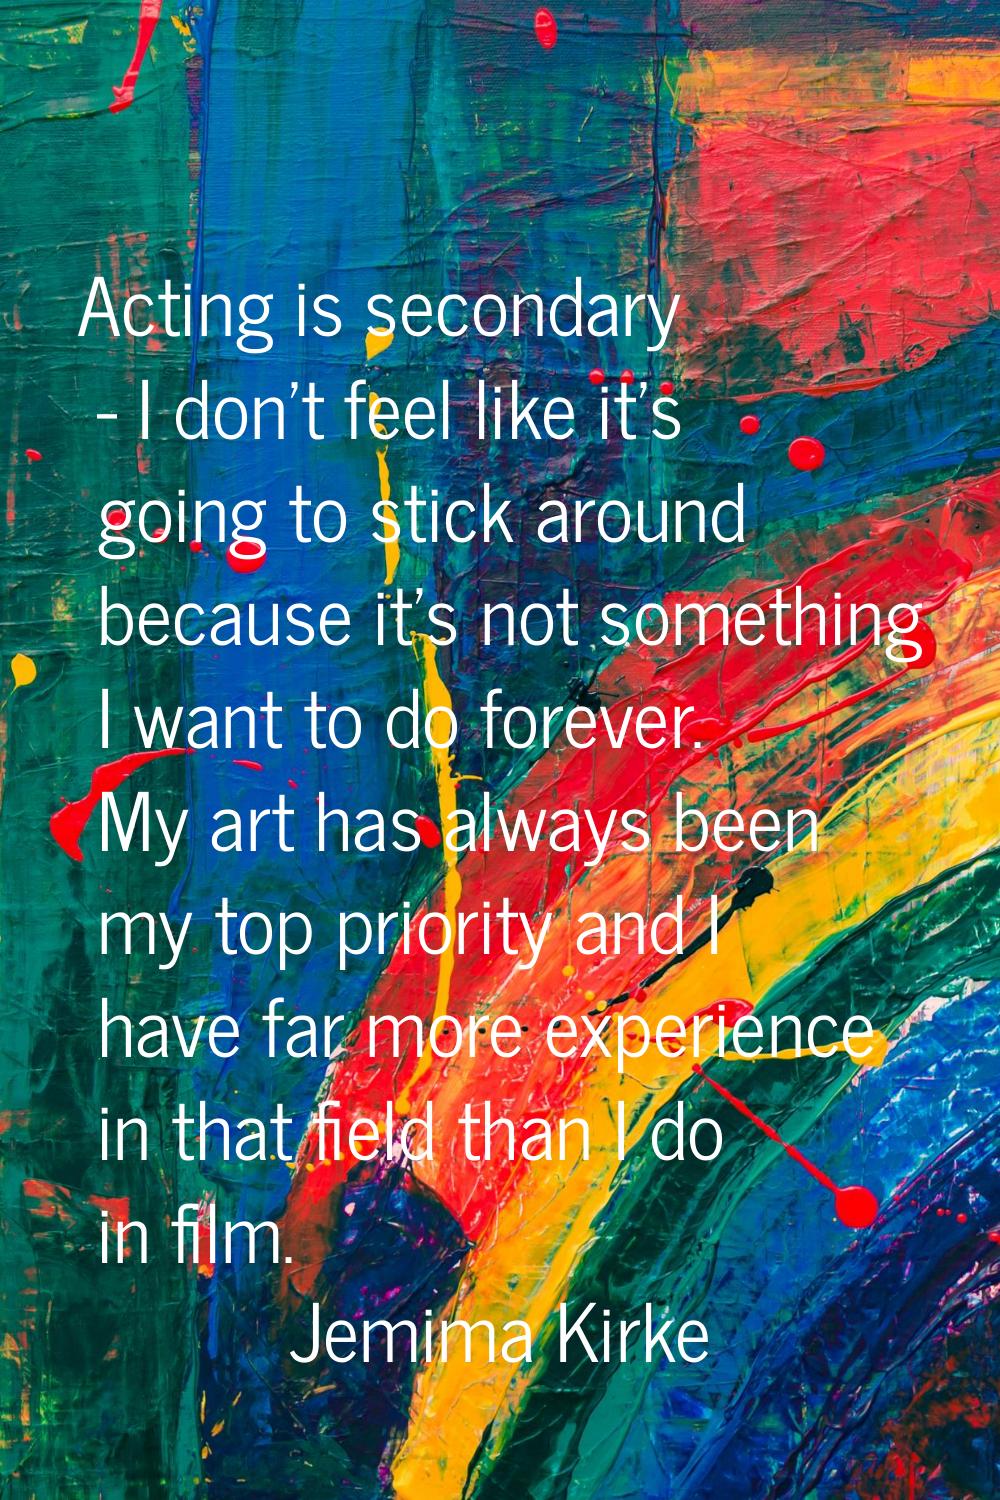 Acting is secondary - I don't feel like it's going to stick around because it's not something I wan